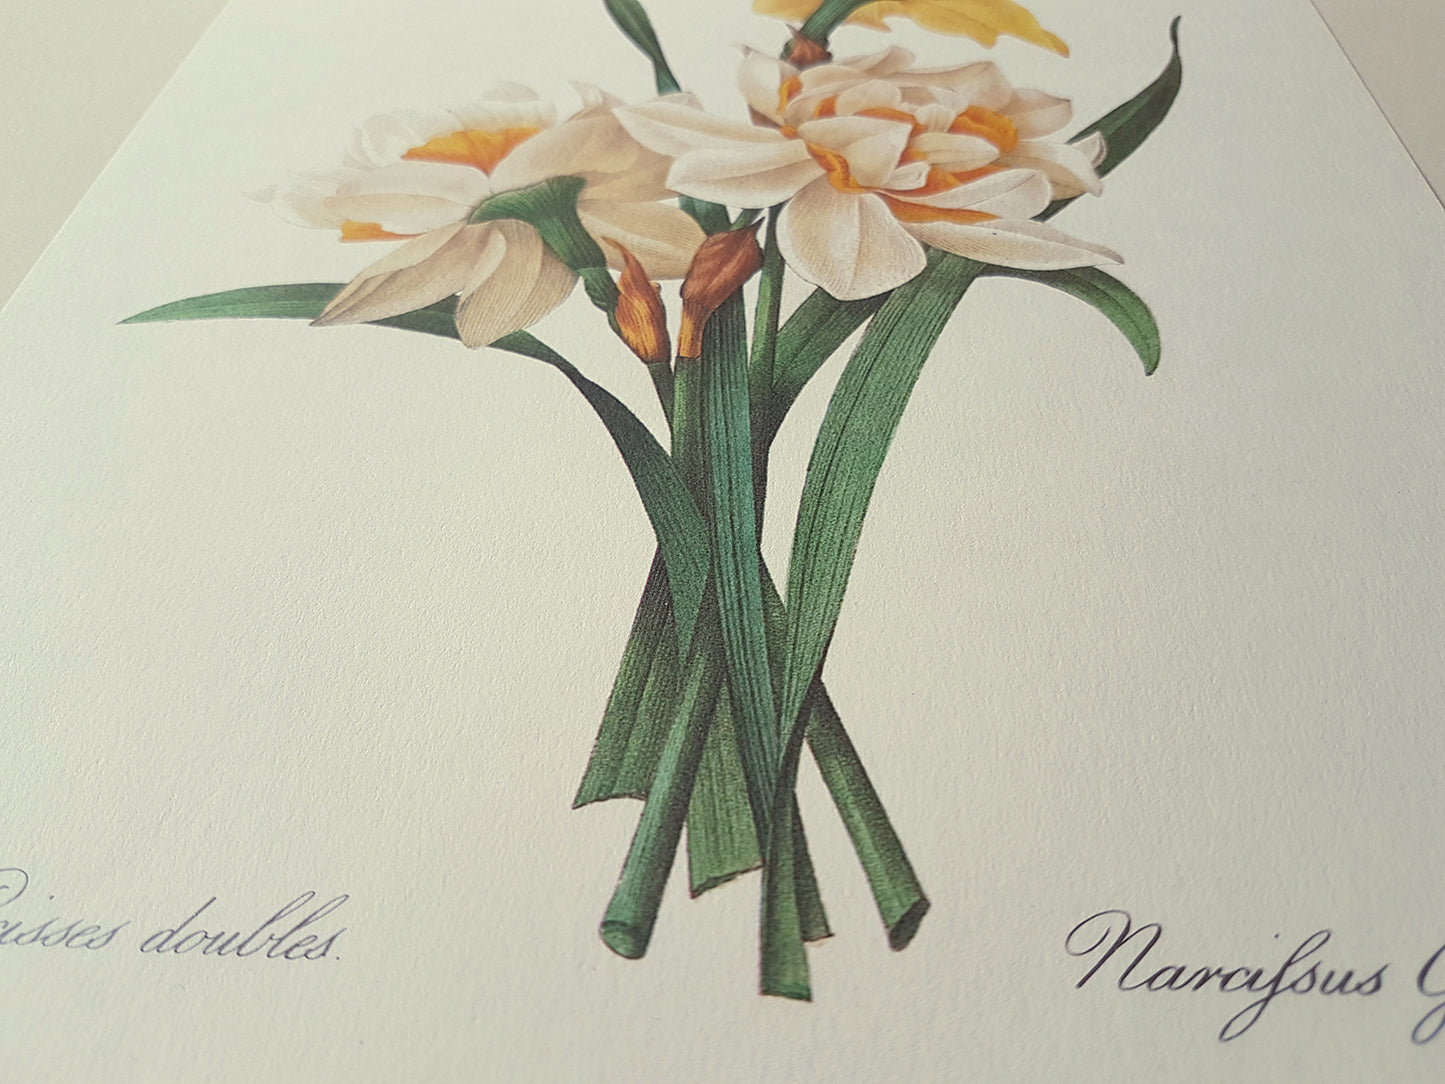 1986 Vintage Double Daffodils Botanical Print by Redouté